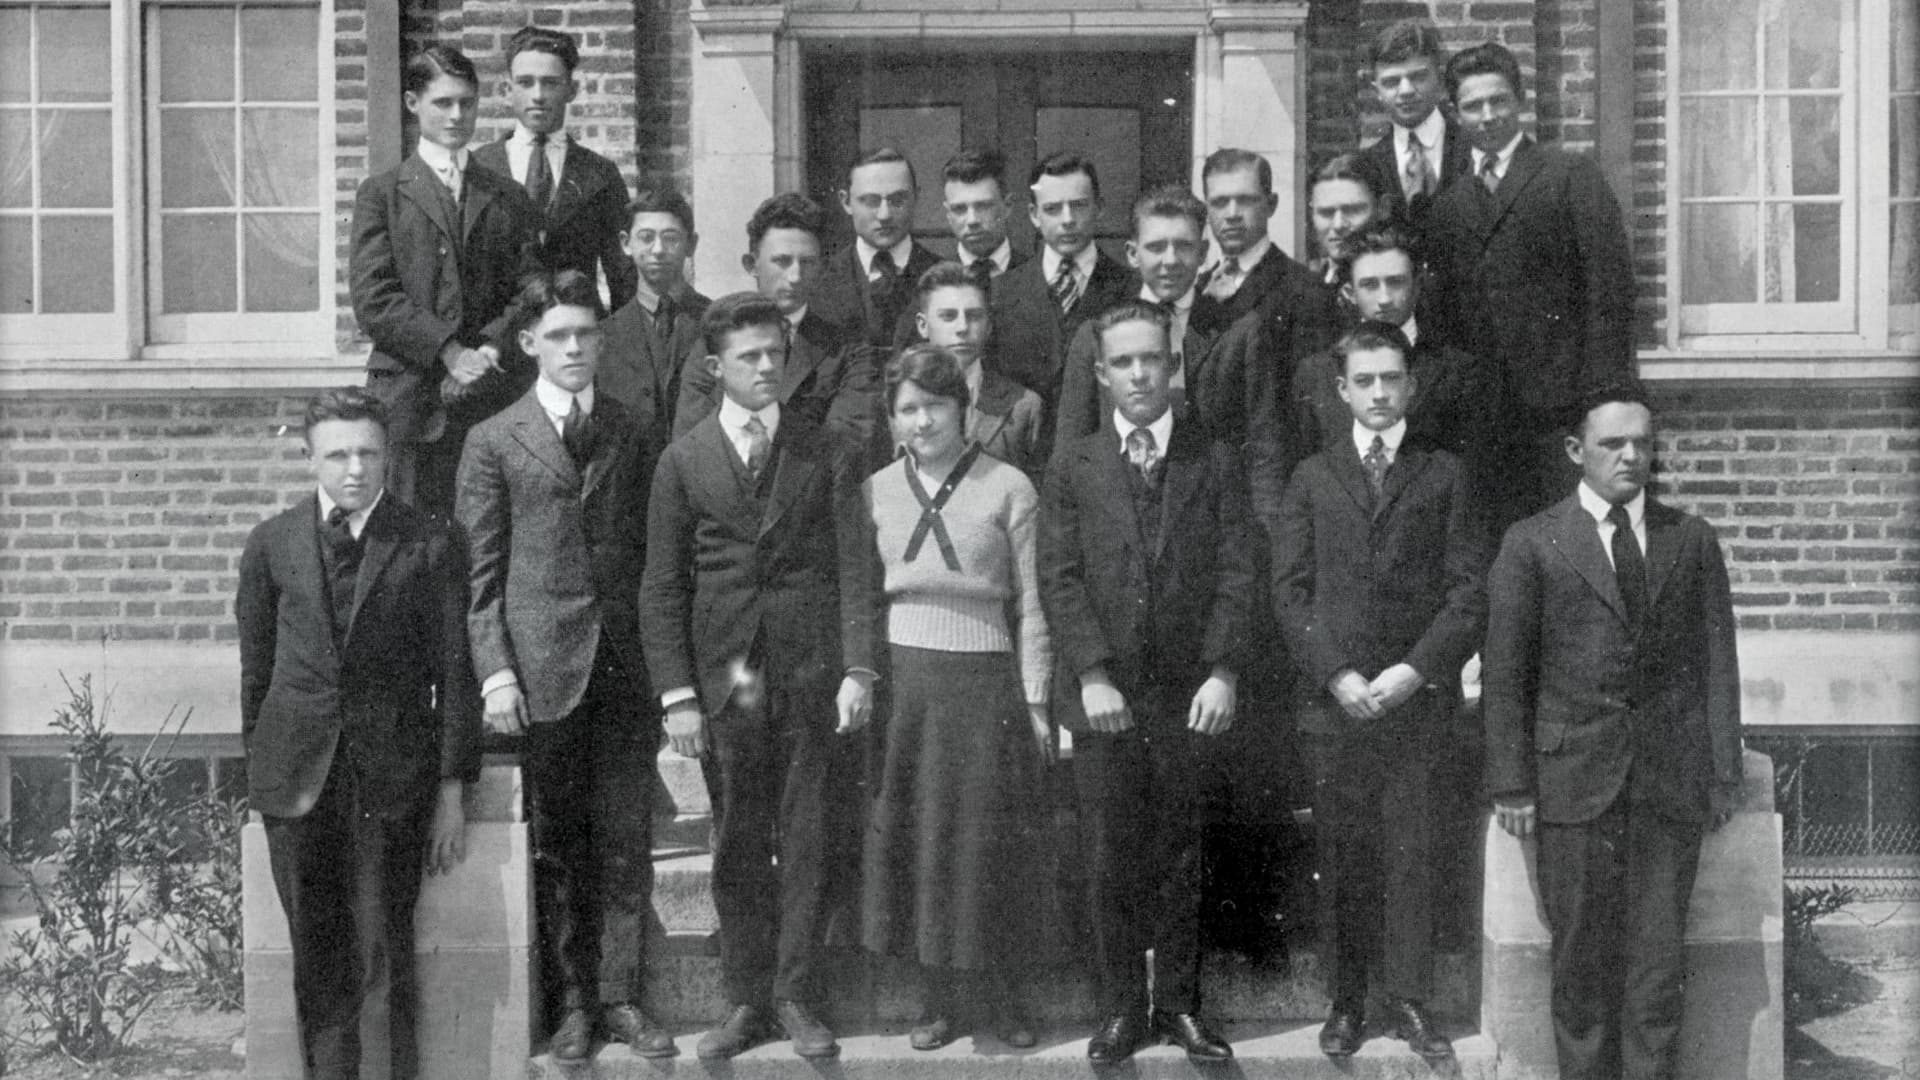 Elizabeth Hook stands out in the class of 1920’s sophomore class photo.